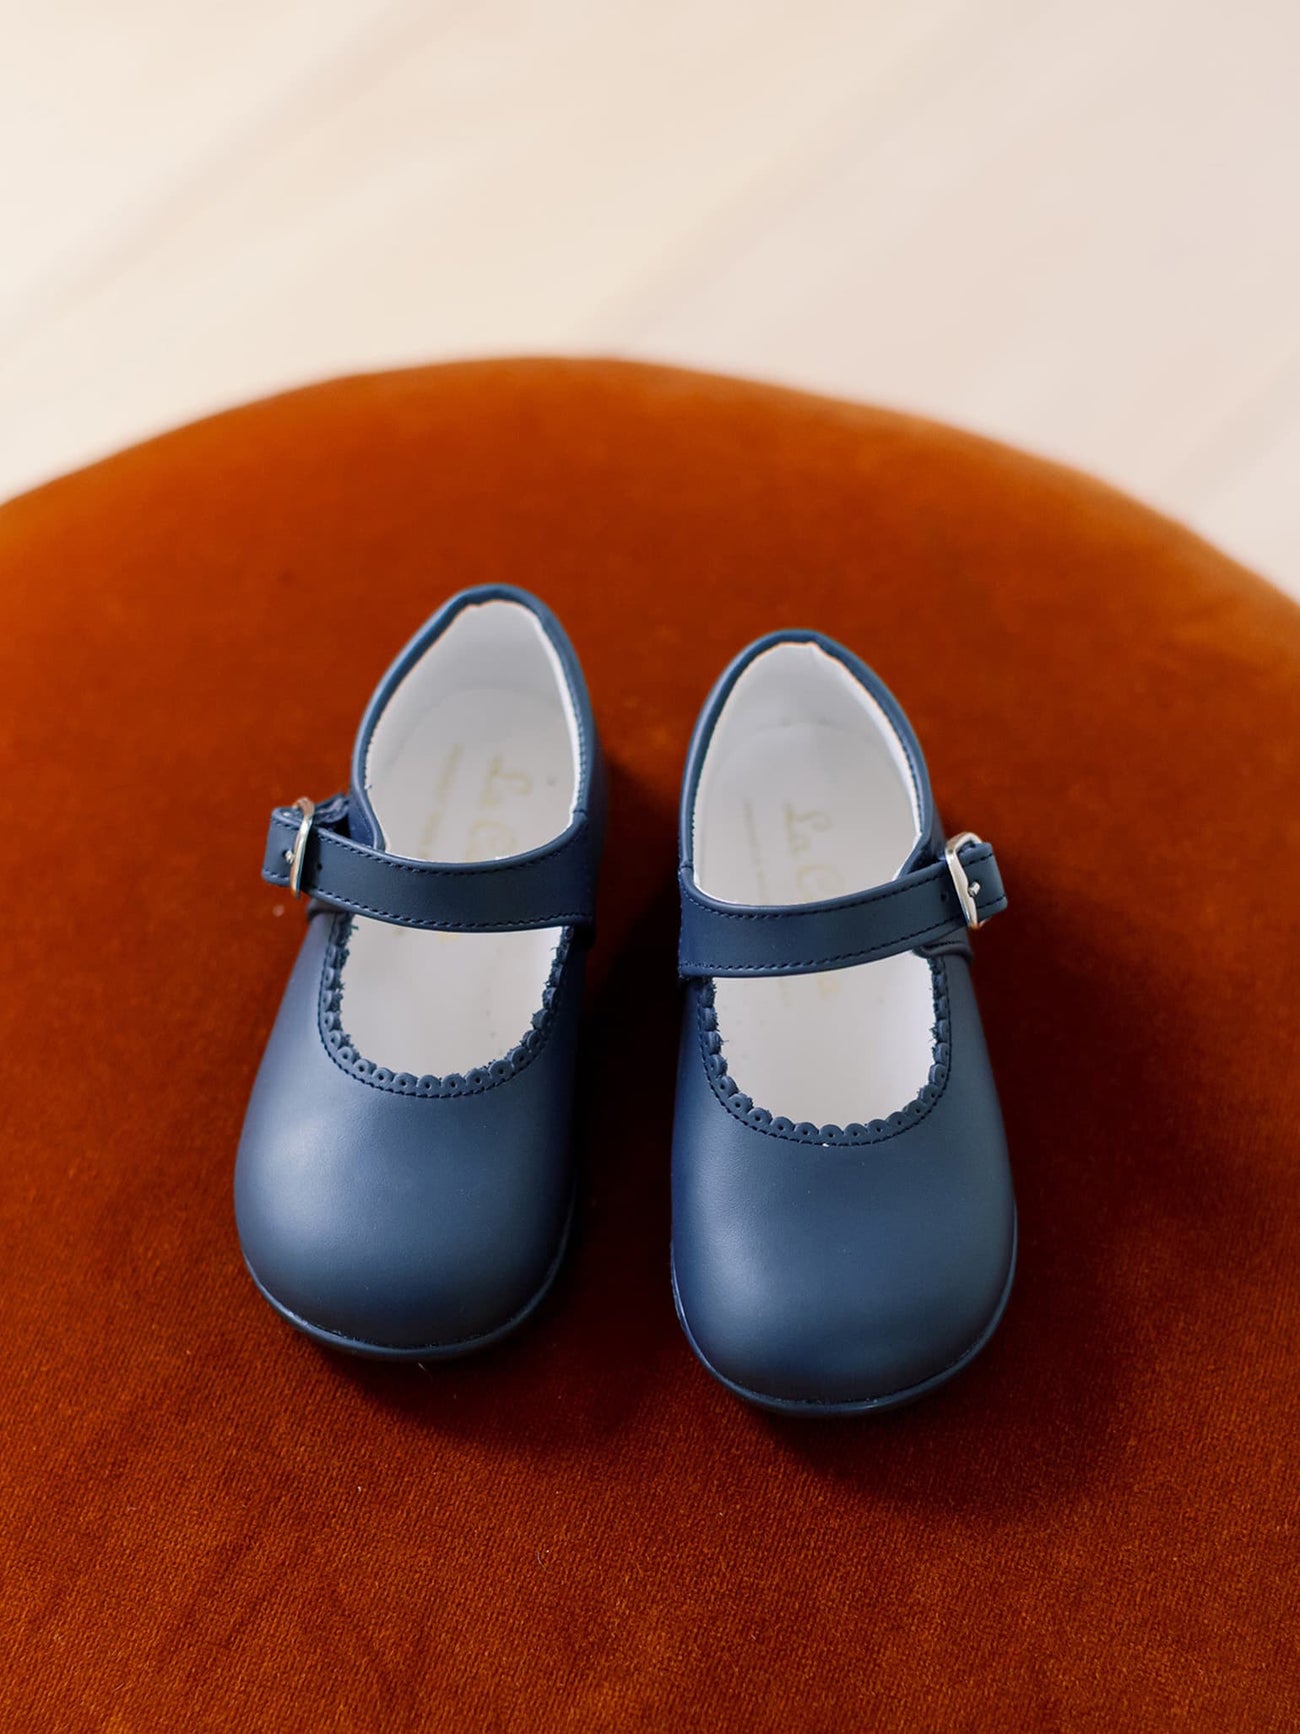 Navy Leather Toddler Mary Jane Shoes